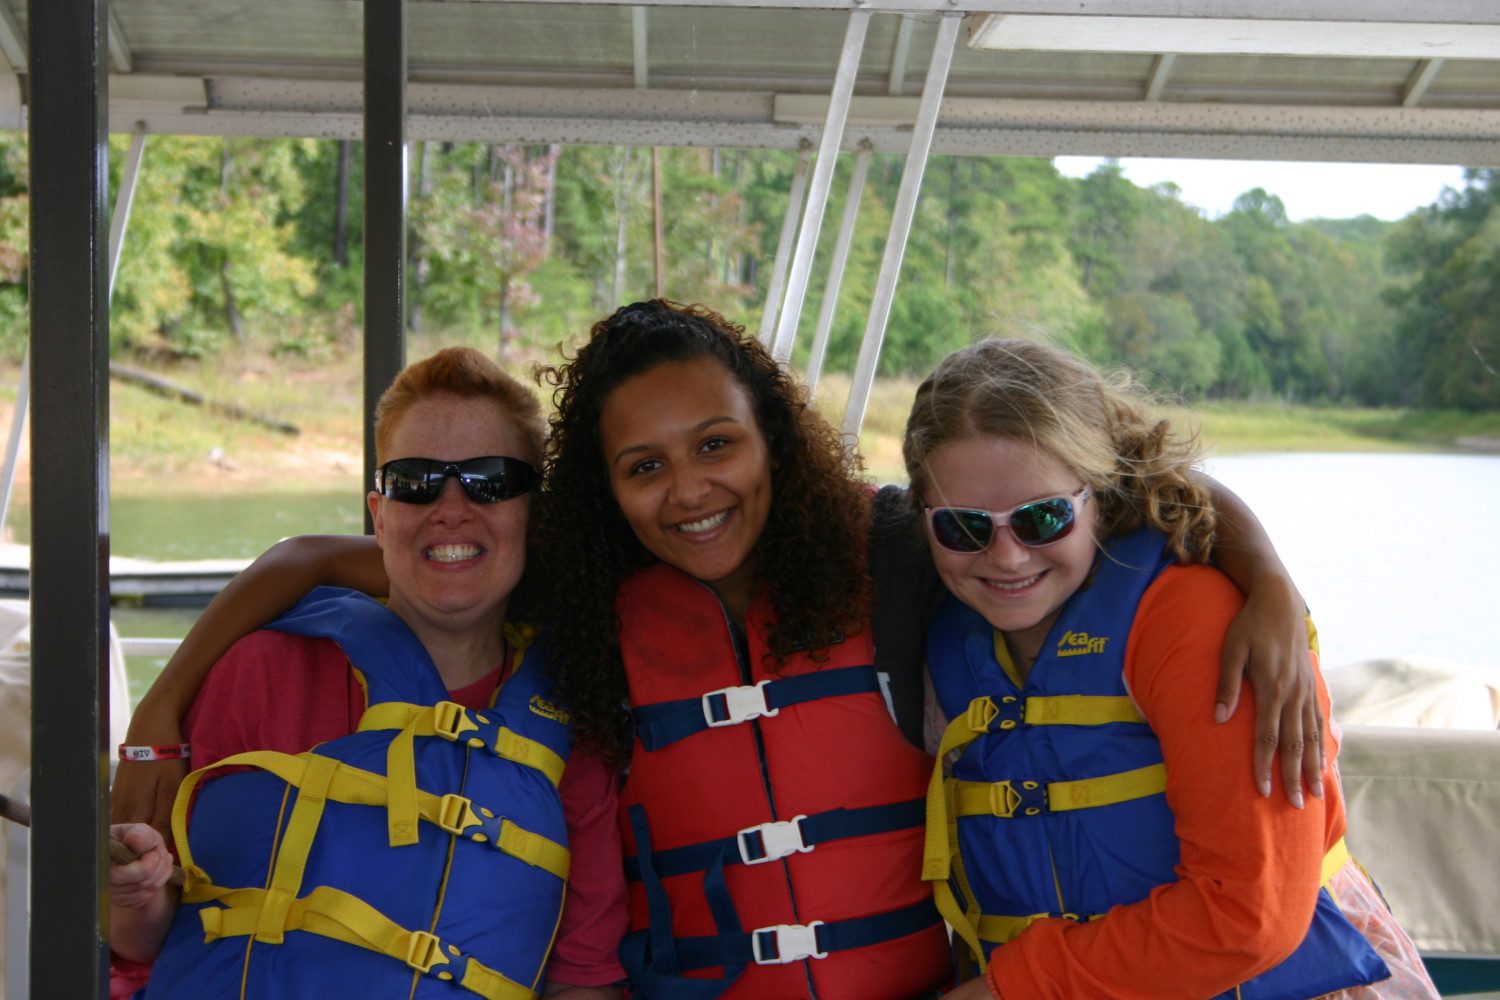 Participants at Camp Sunshine have the chance to go boating, swimming among many other activities.